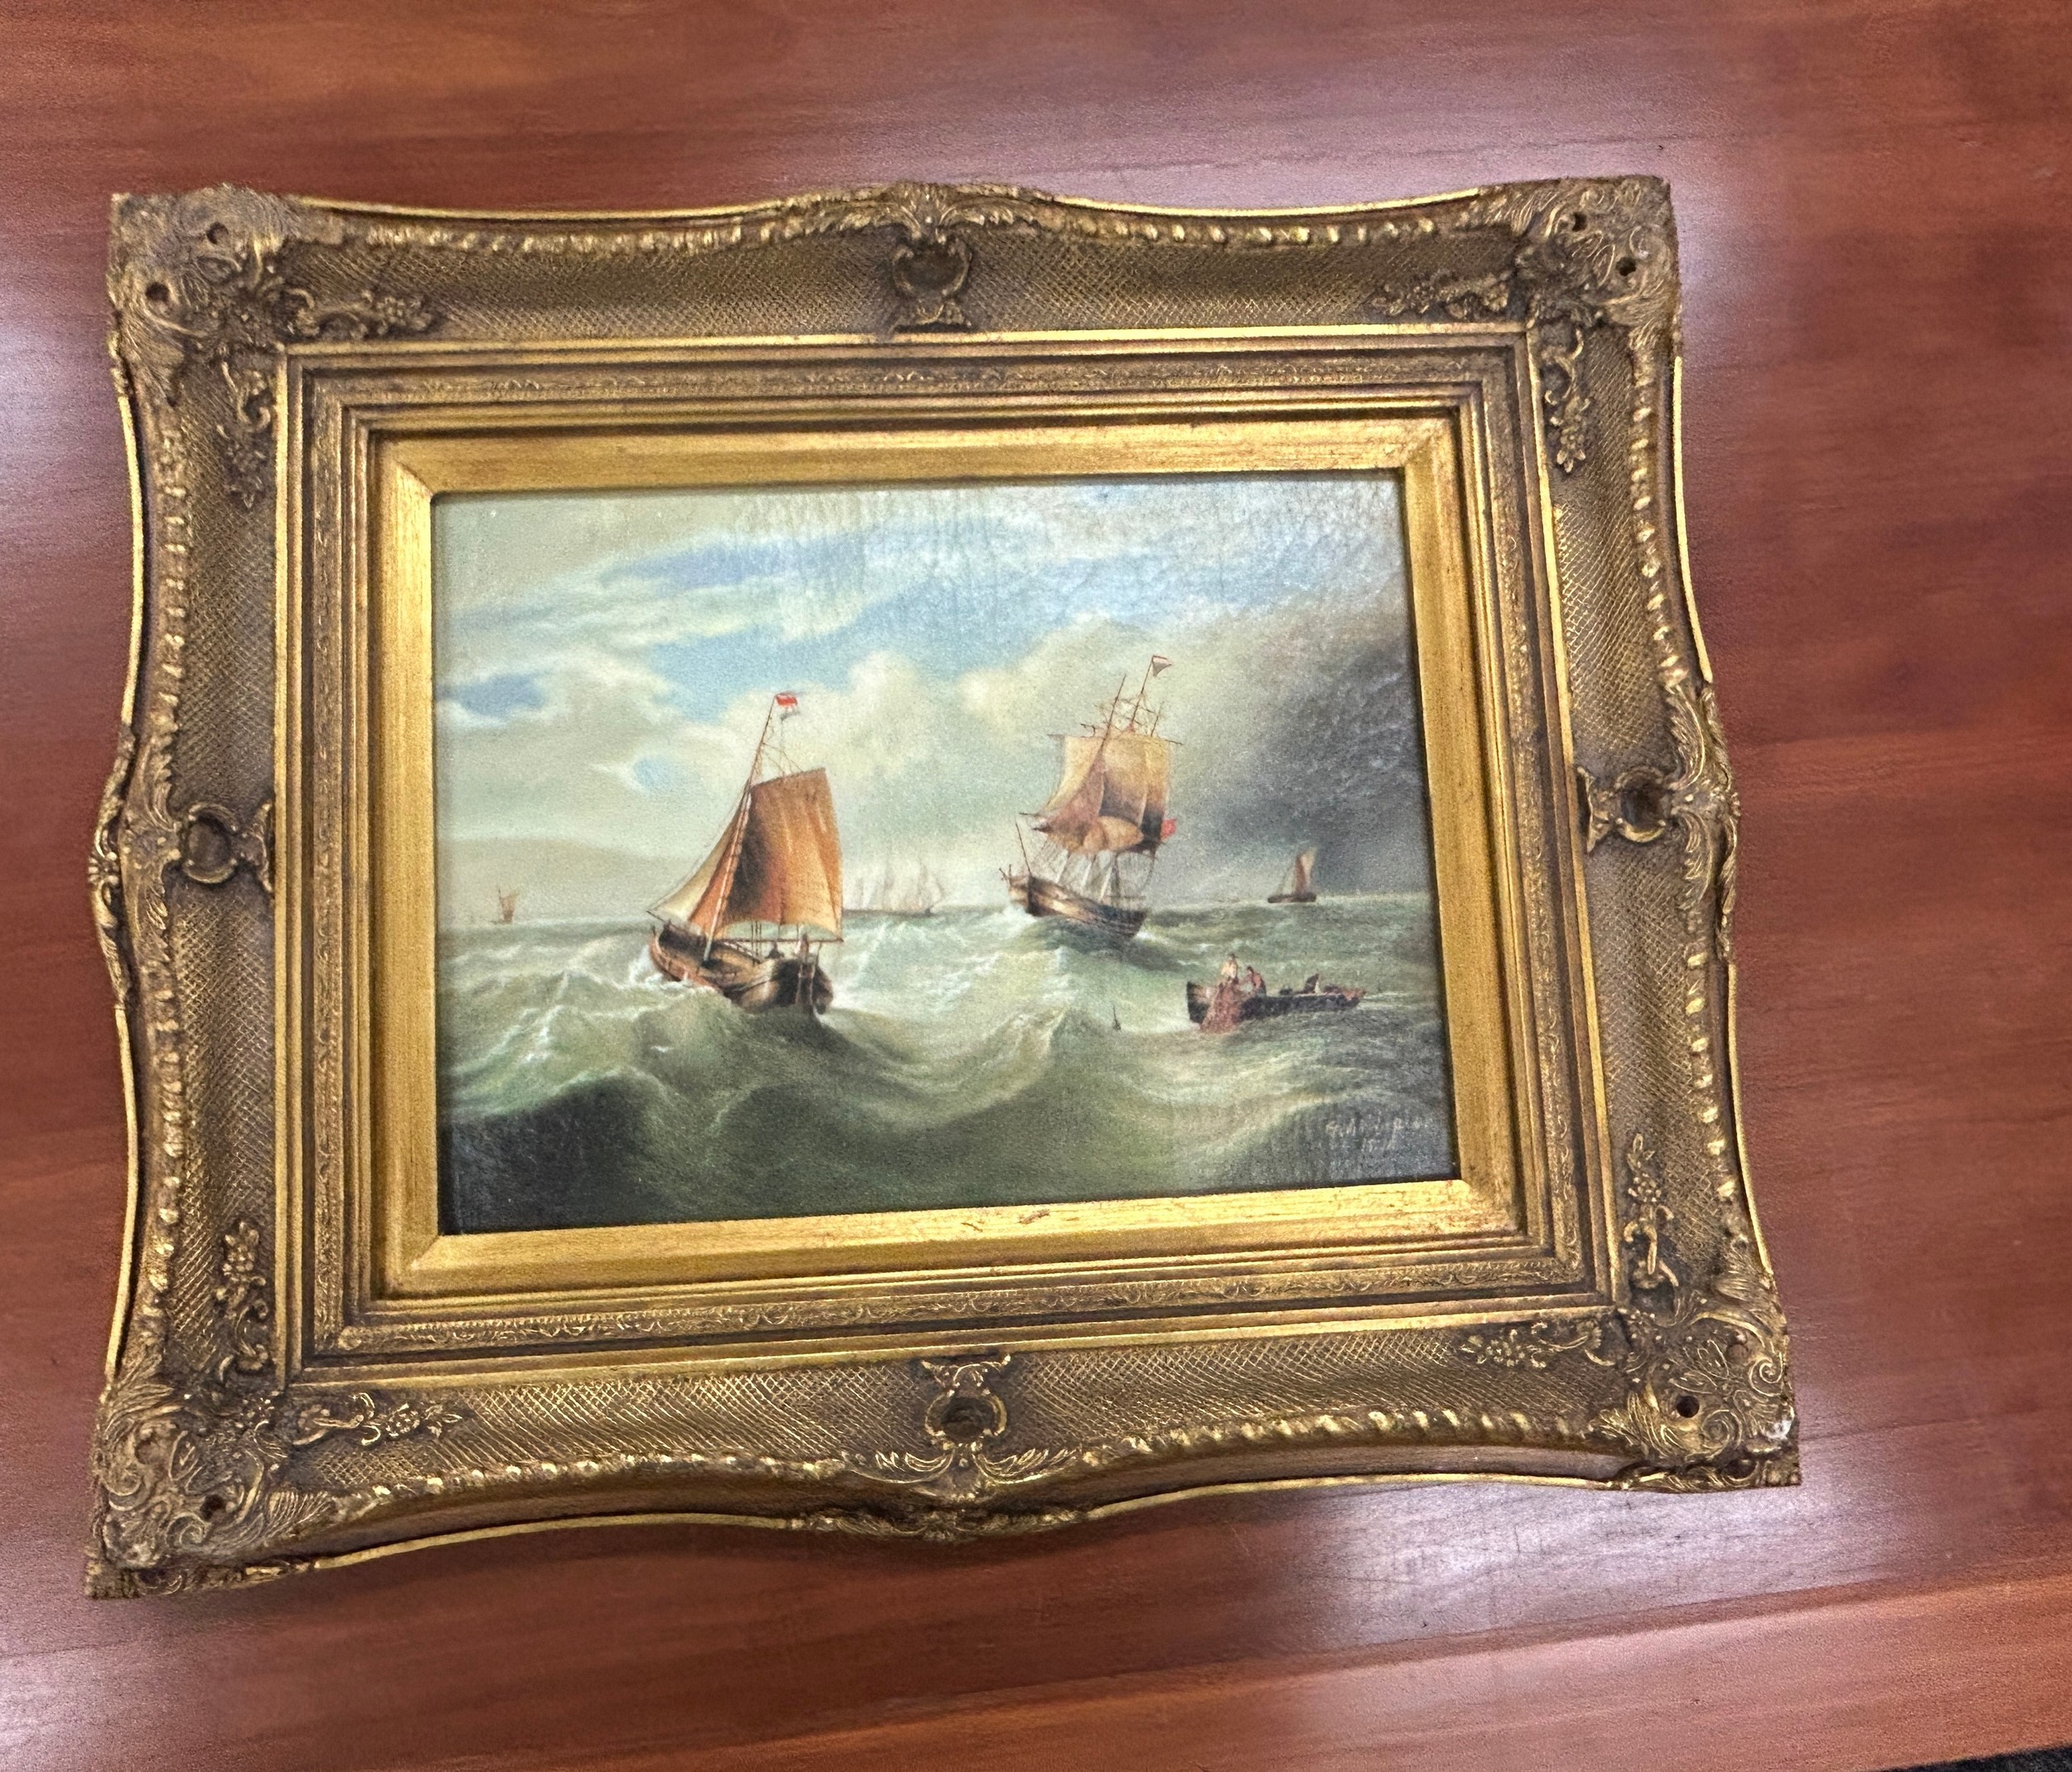 Gilt framed oil on boards depicting gallions measures approximately 24 inches tall 19 inches wide